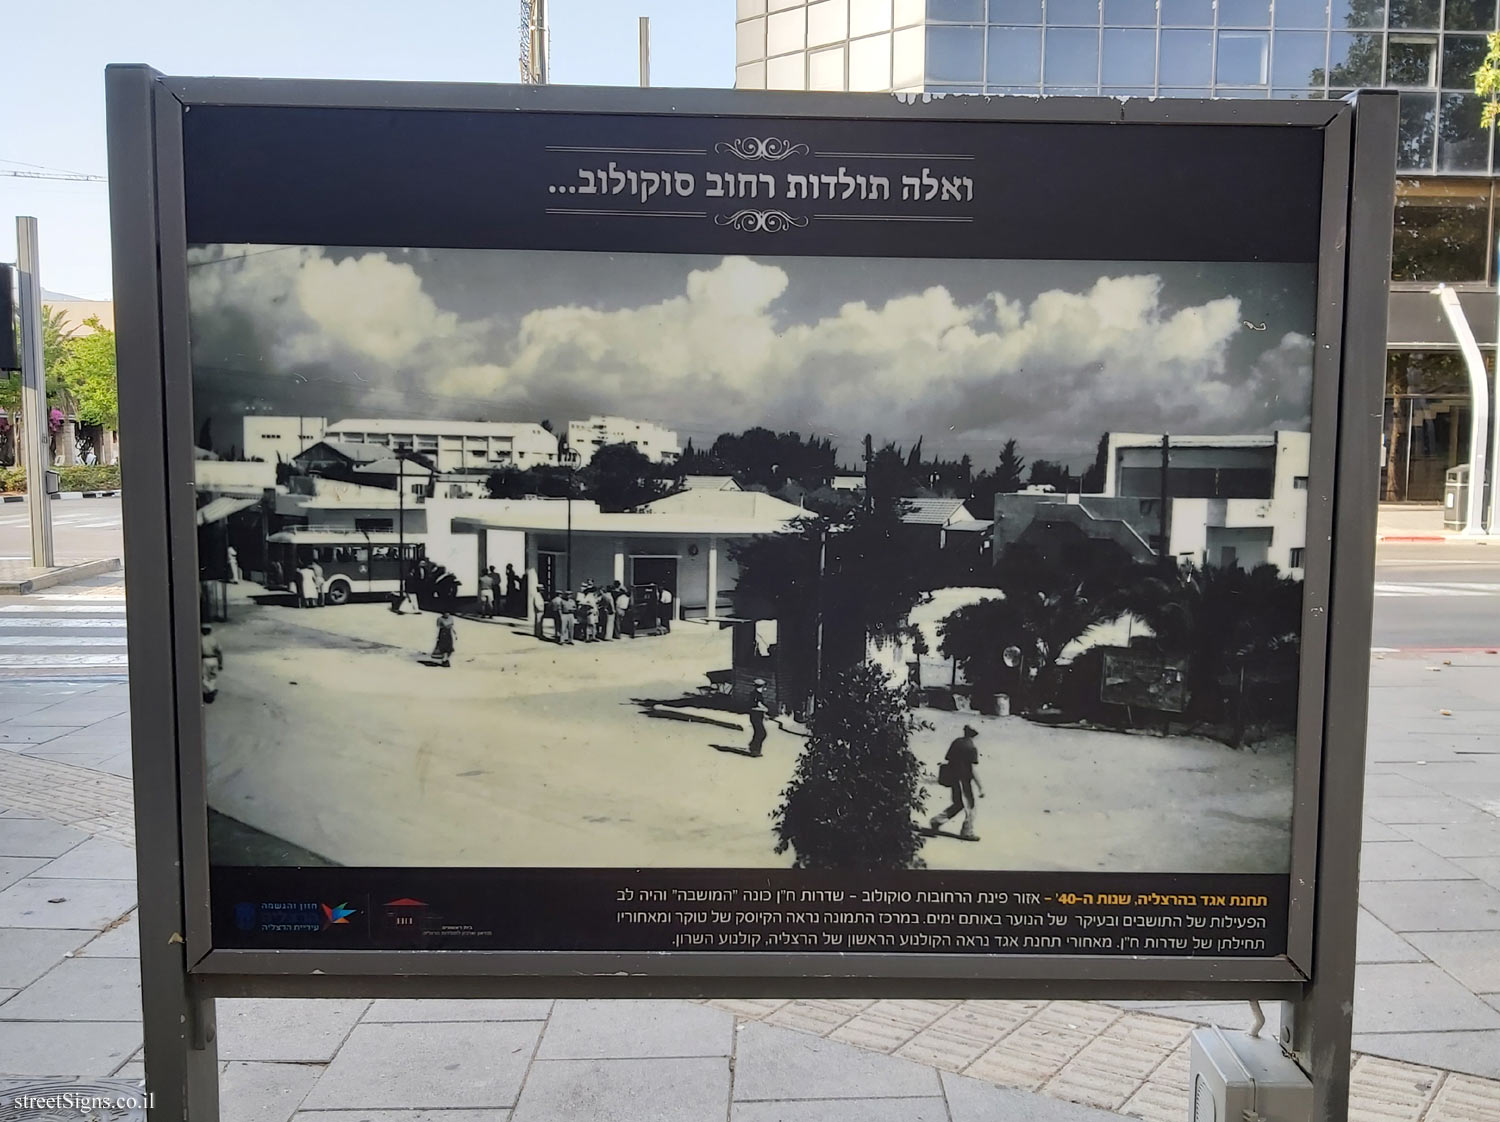 Herzliya - and this is the history of Sokolov Street - Egged Station